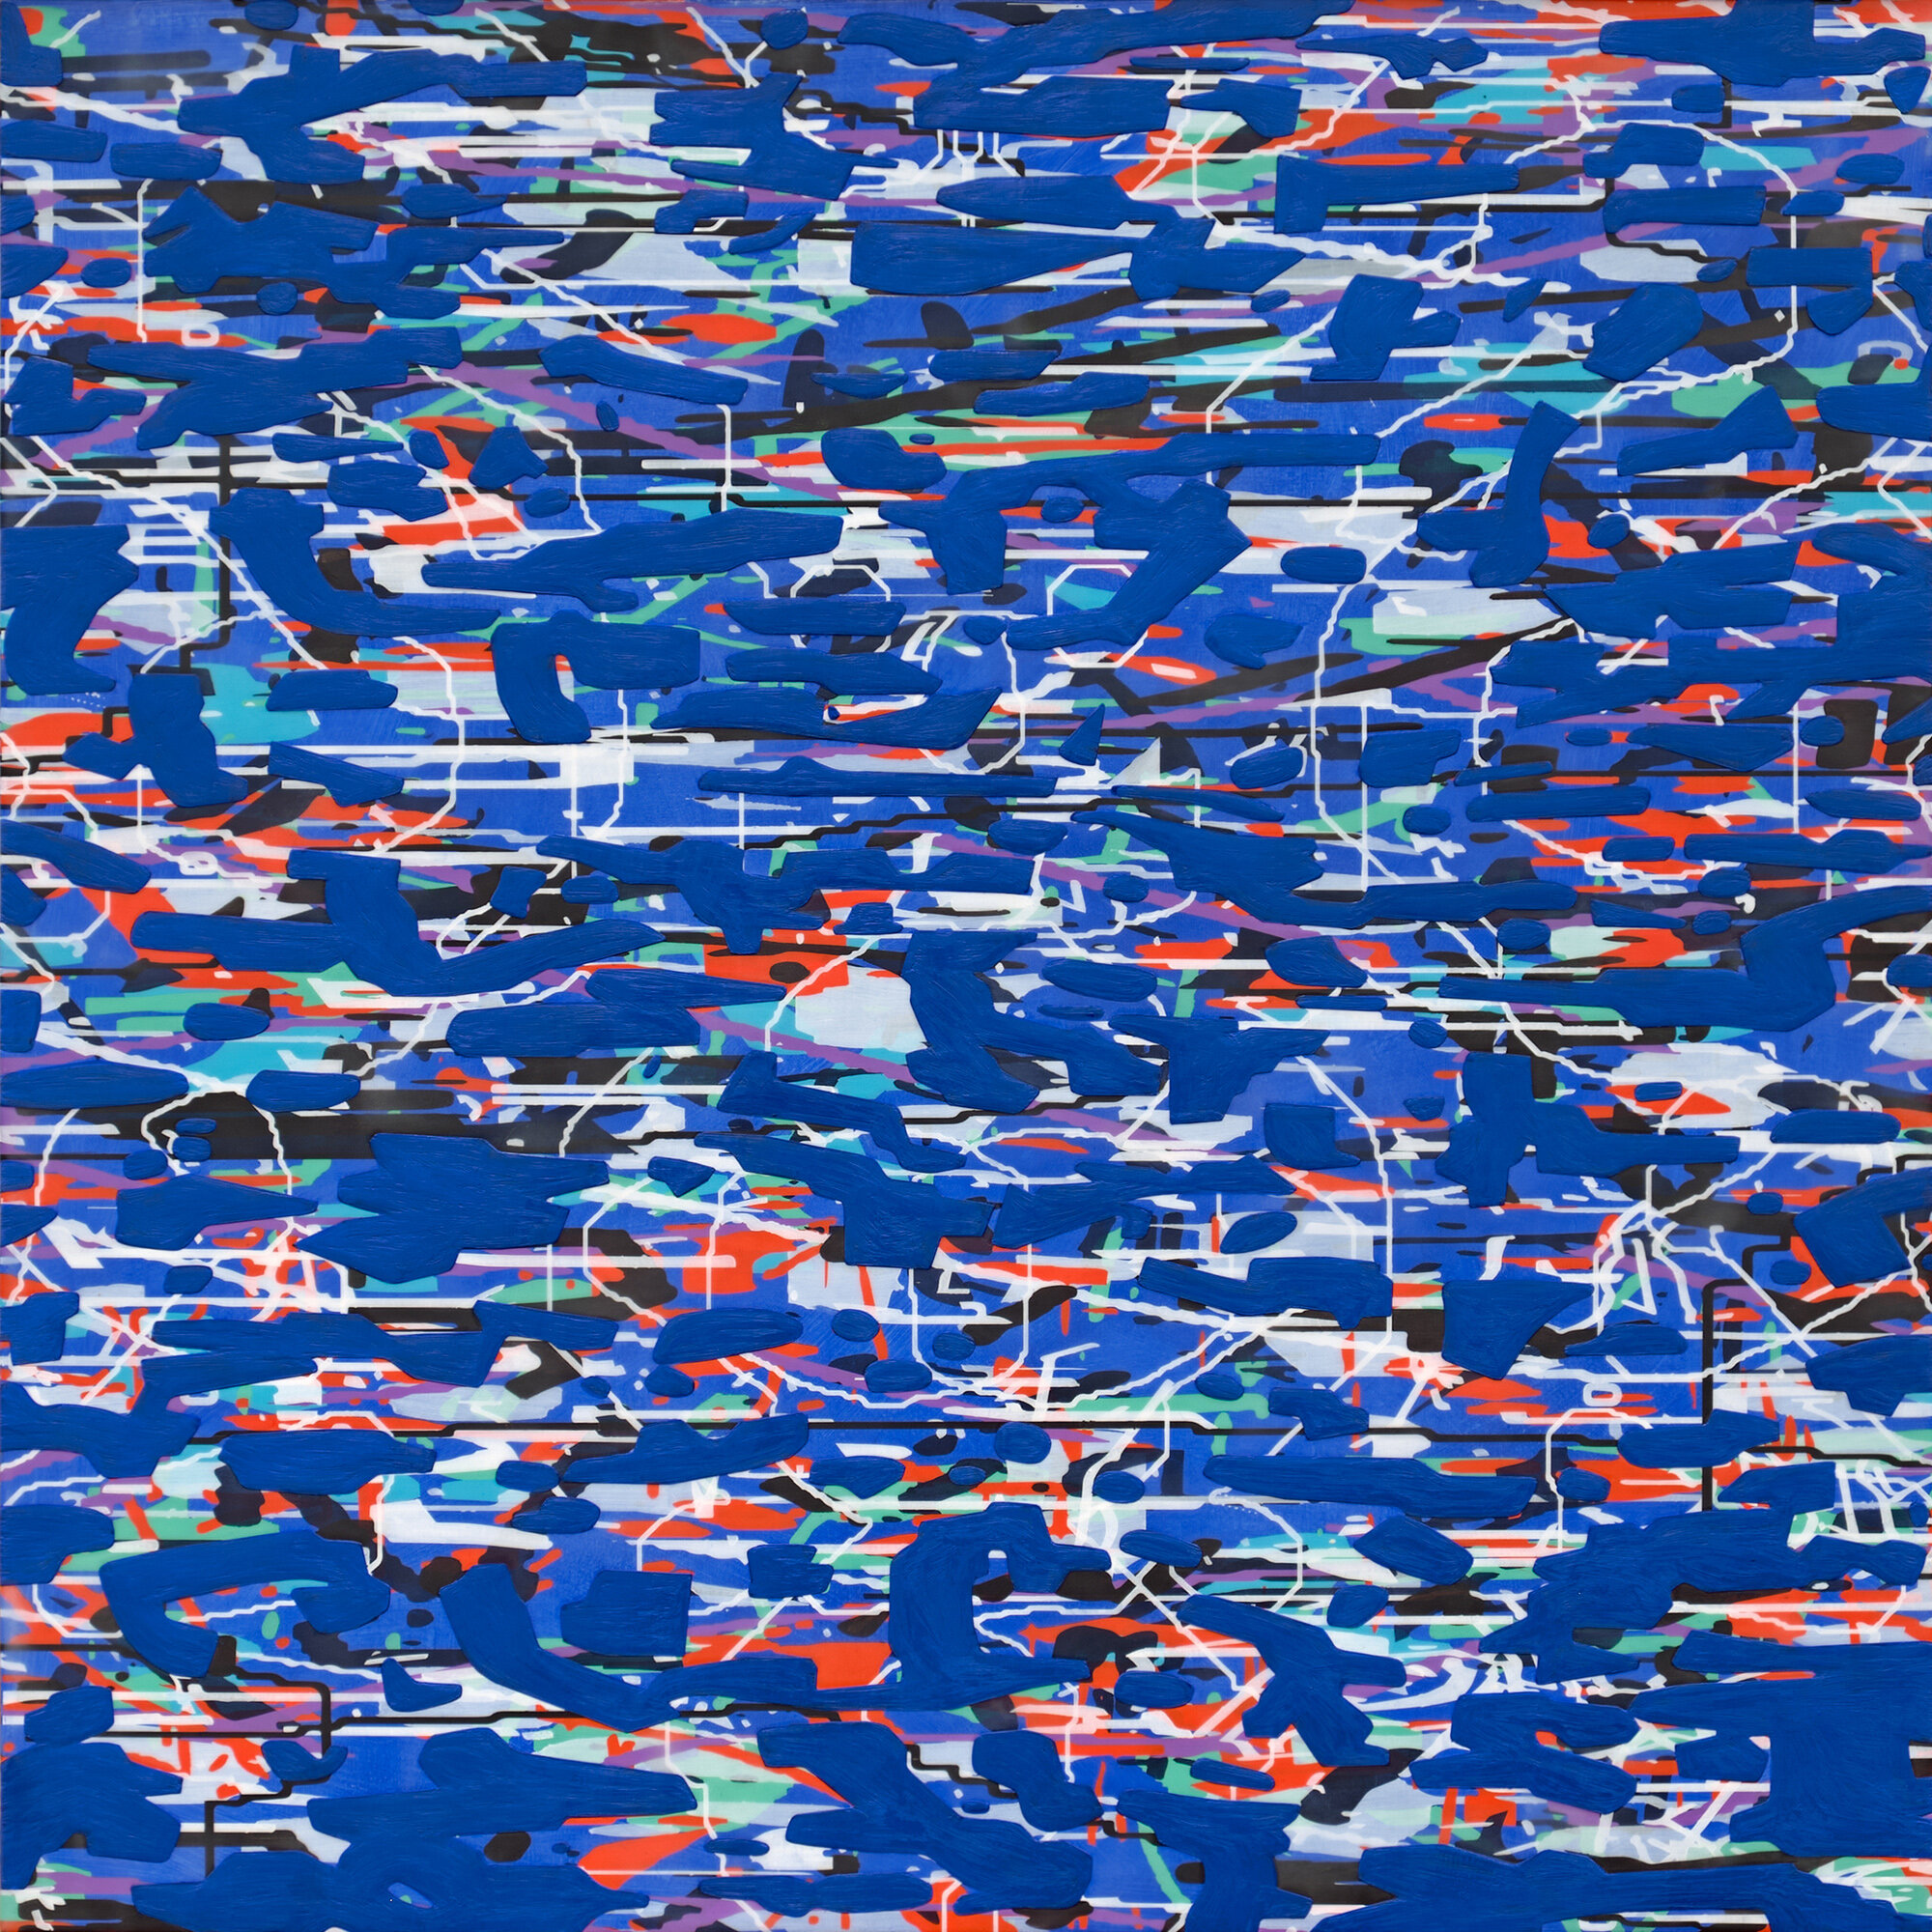   Variation (ultramarine),  2020 Oil and encaustic on panel 36 x 36 inches 